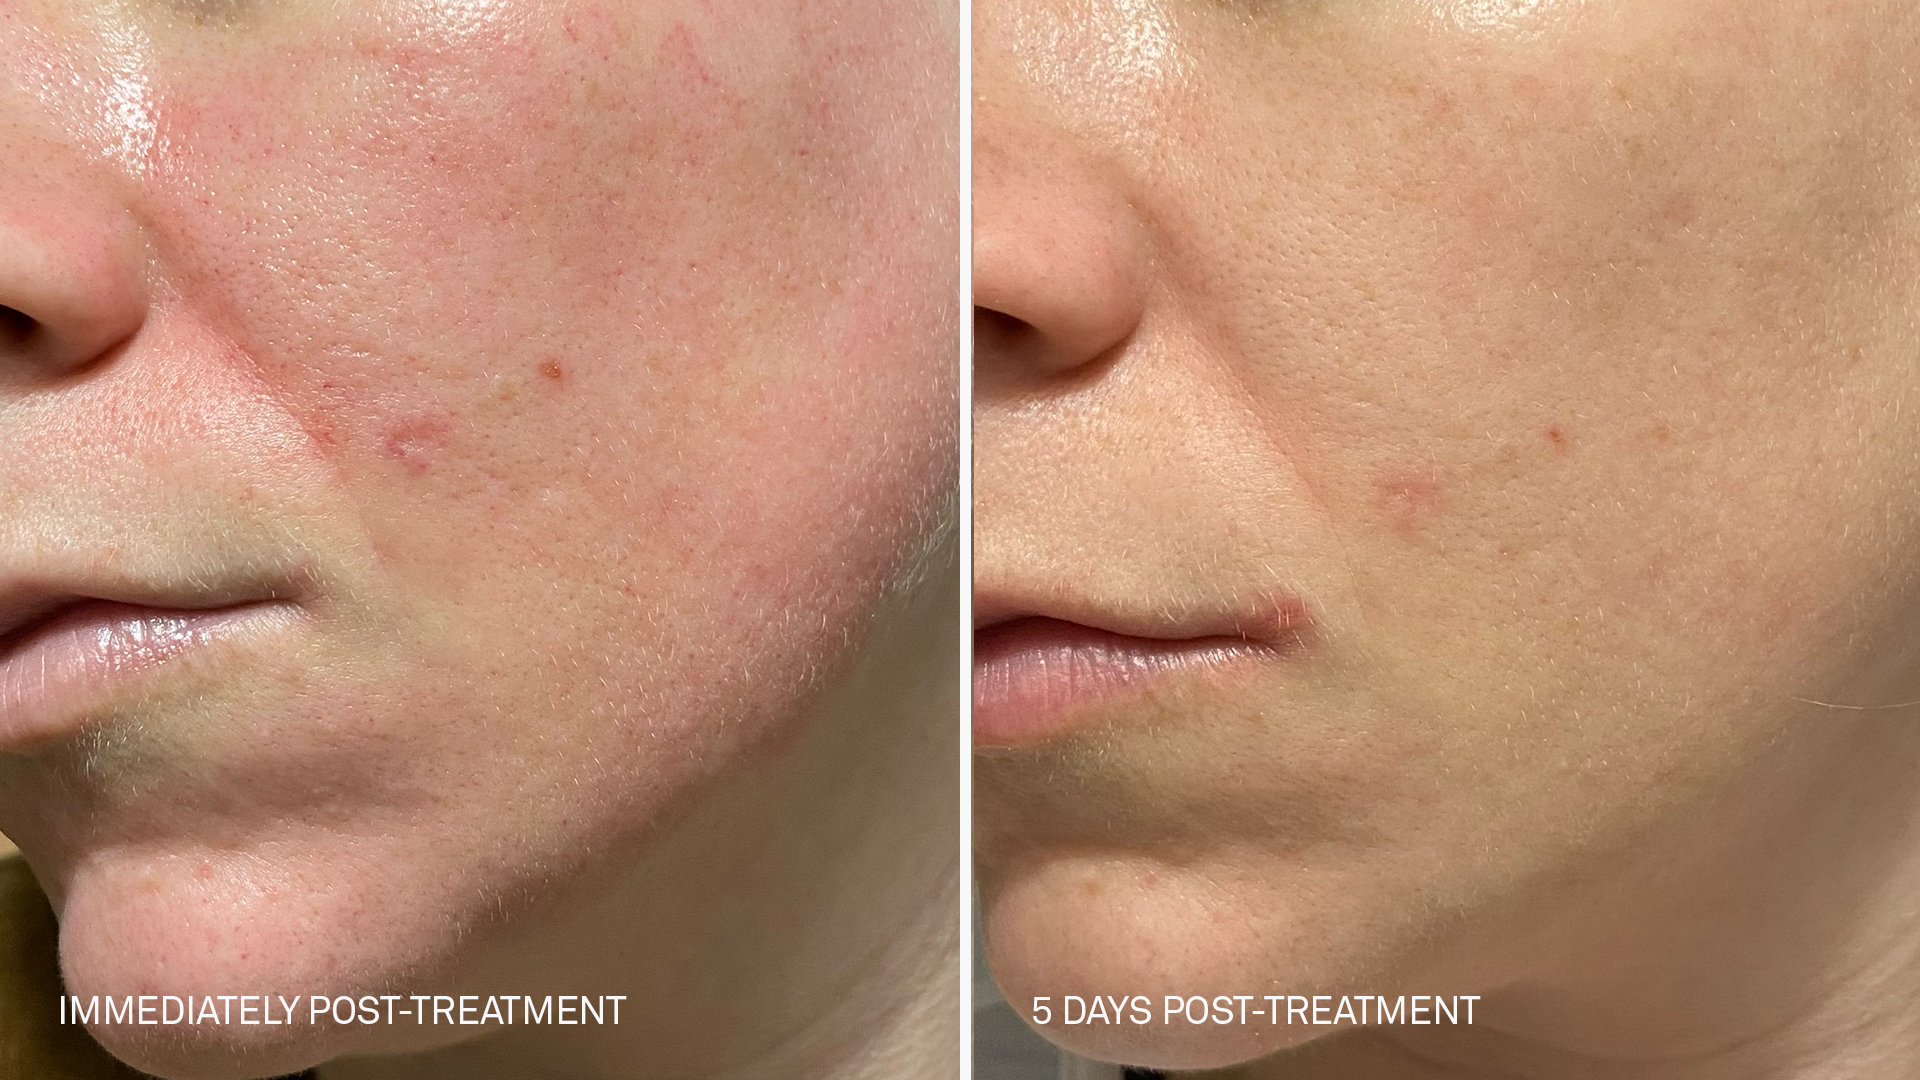 a clear before and after comparison of a woman's face immediately after microneedling treatment with redness, and 5 days post treatment, now the face is significantly clear and by using the RescueMD serum